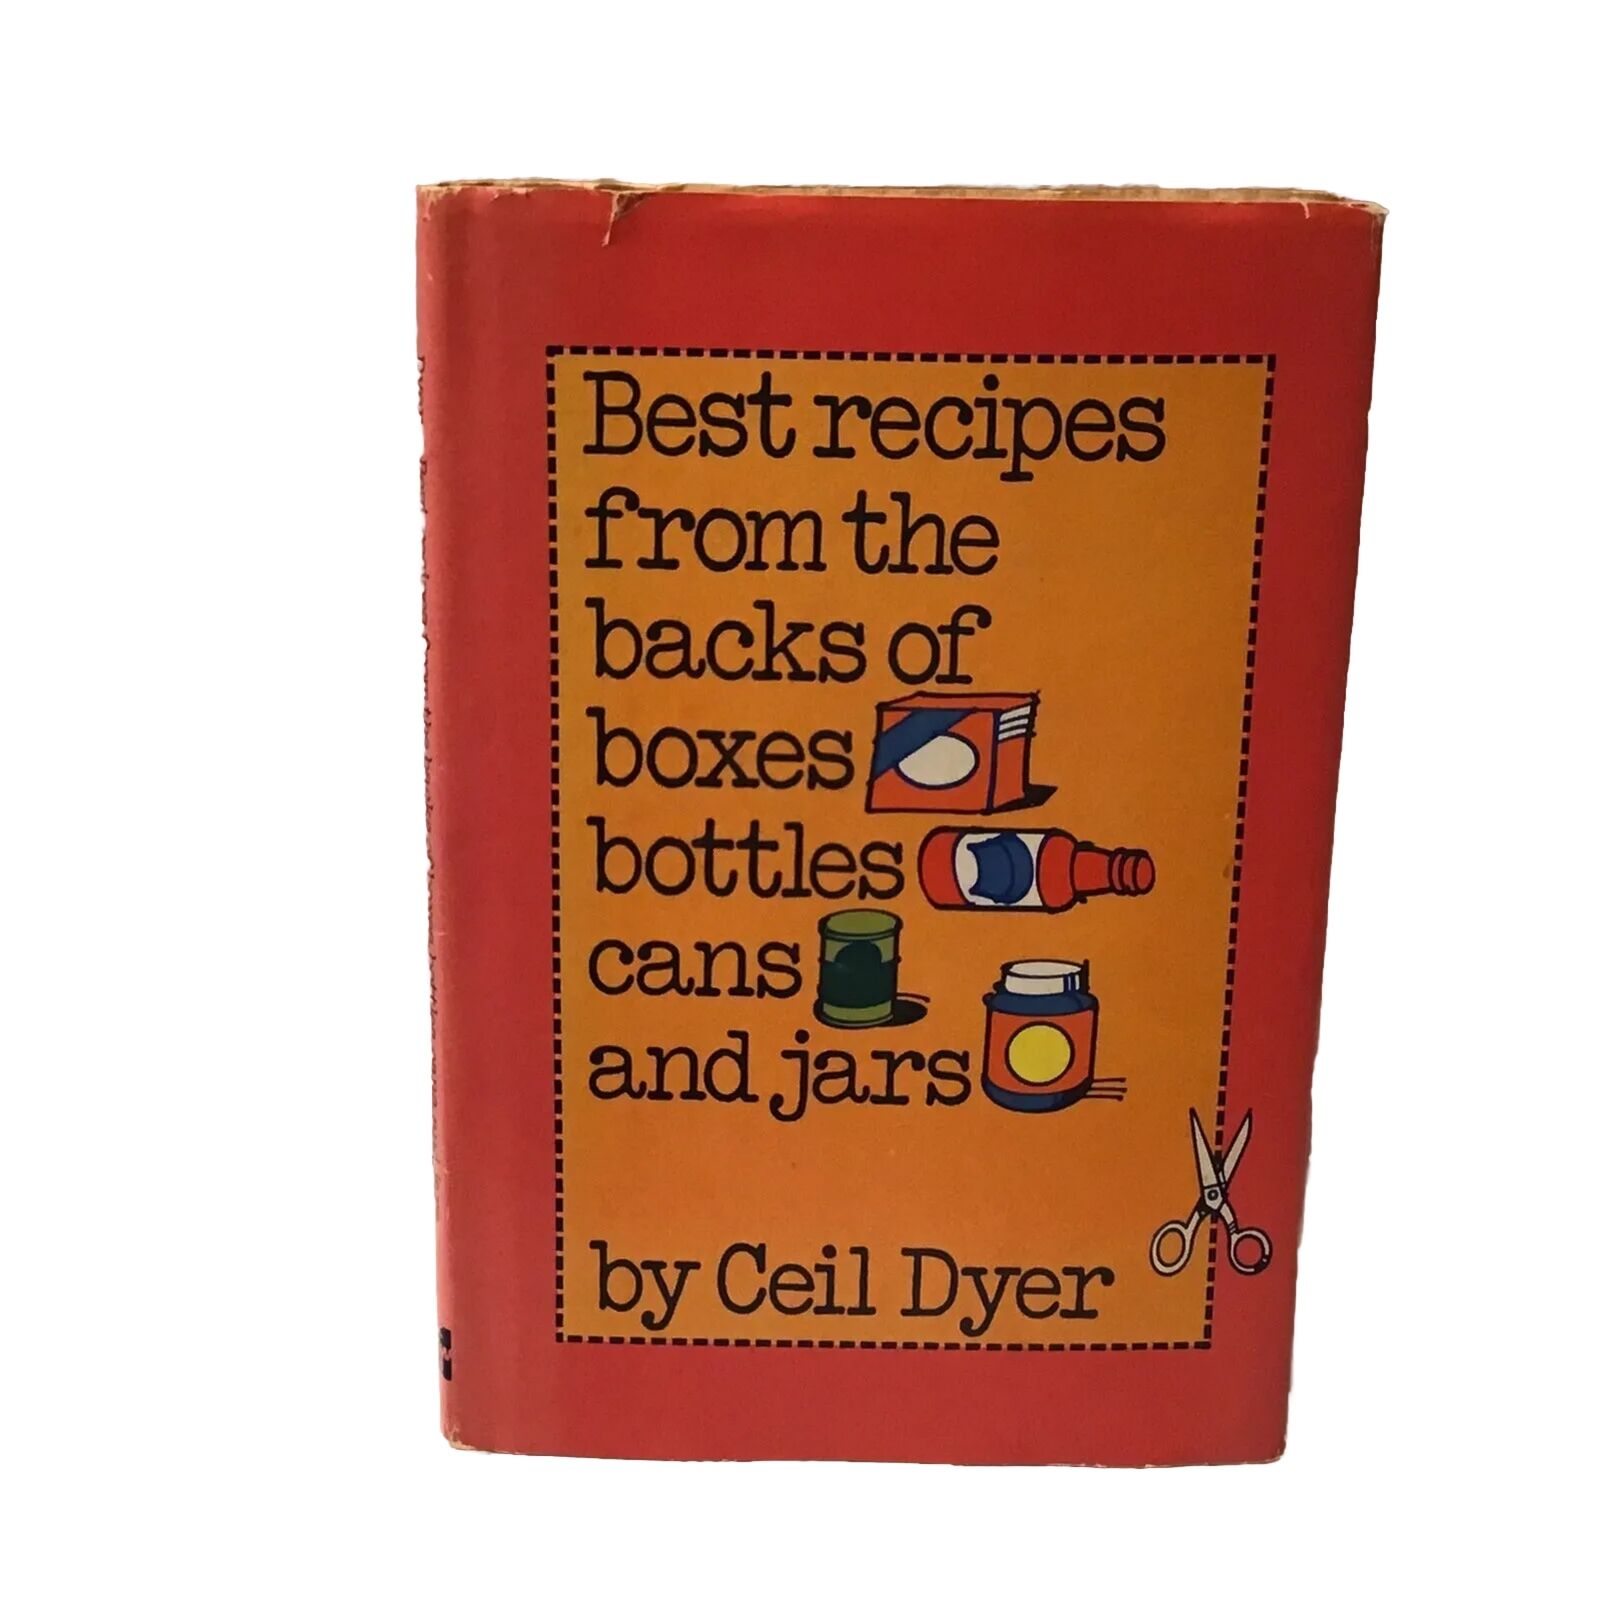 Ceil Dyer 1979 Best Recipes Book from Backs of Boxes Bottles Cans Jars Hardcover